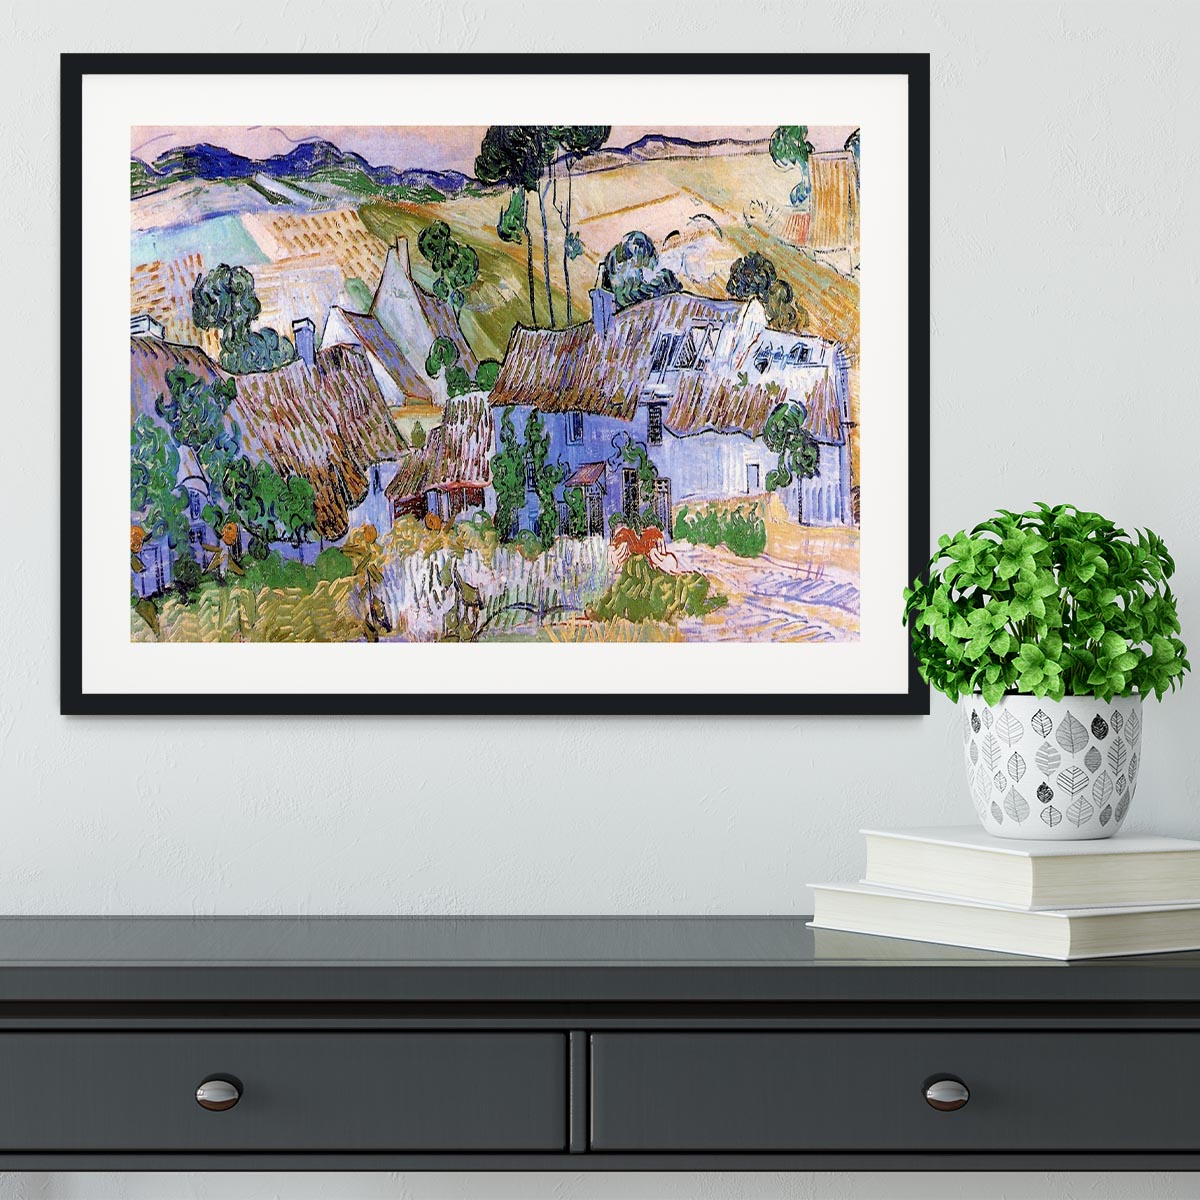 Thatched Cottages by a Hill by Van Gogh Framed Print - Canvas Art Rocks - 1